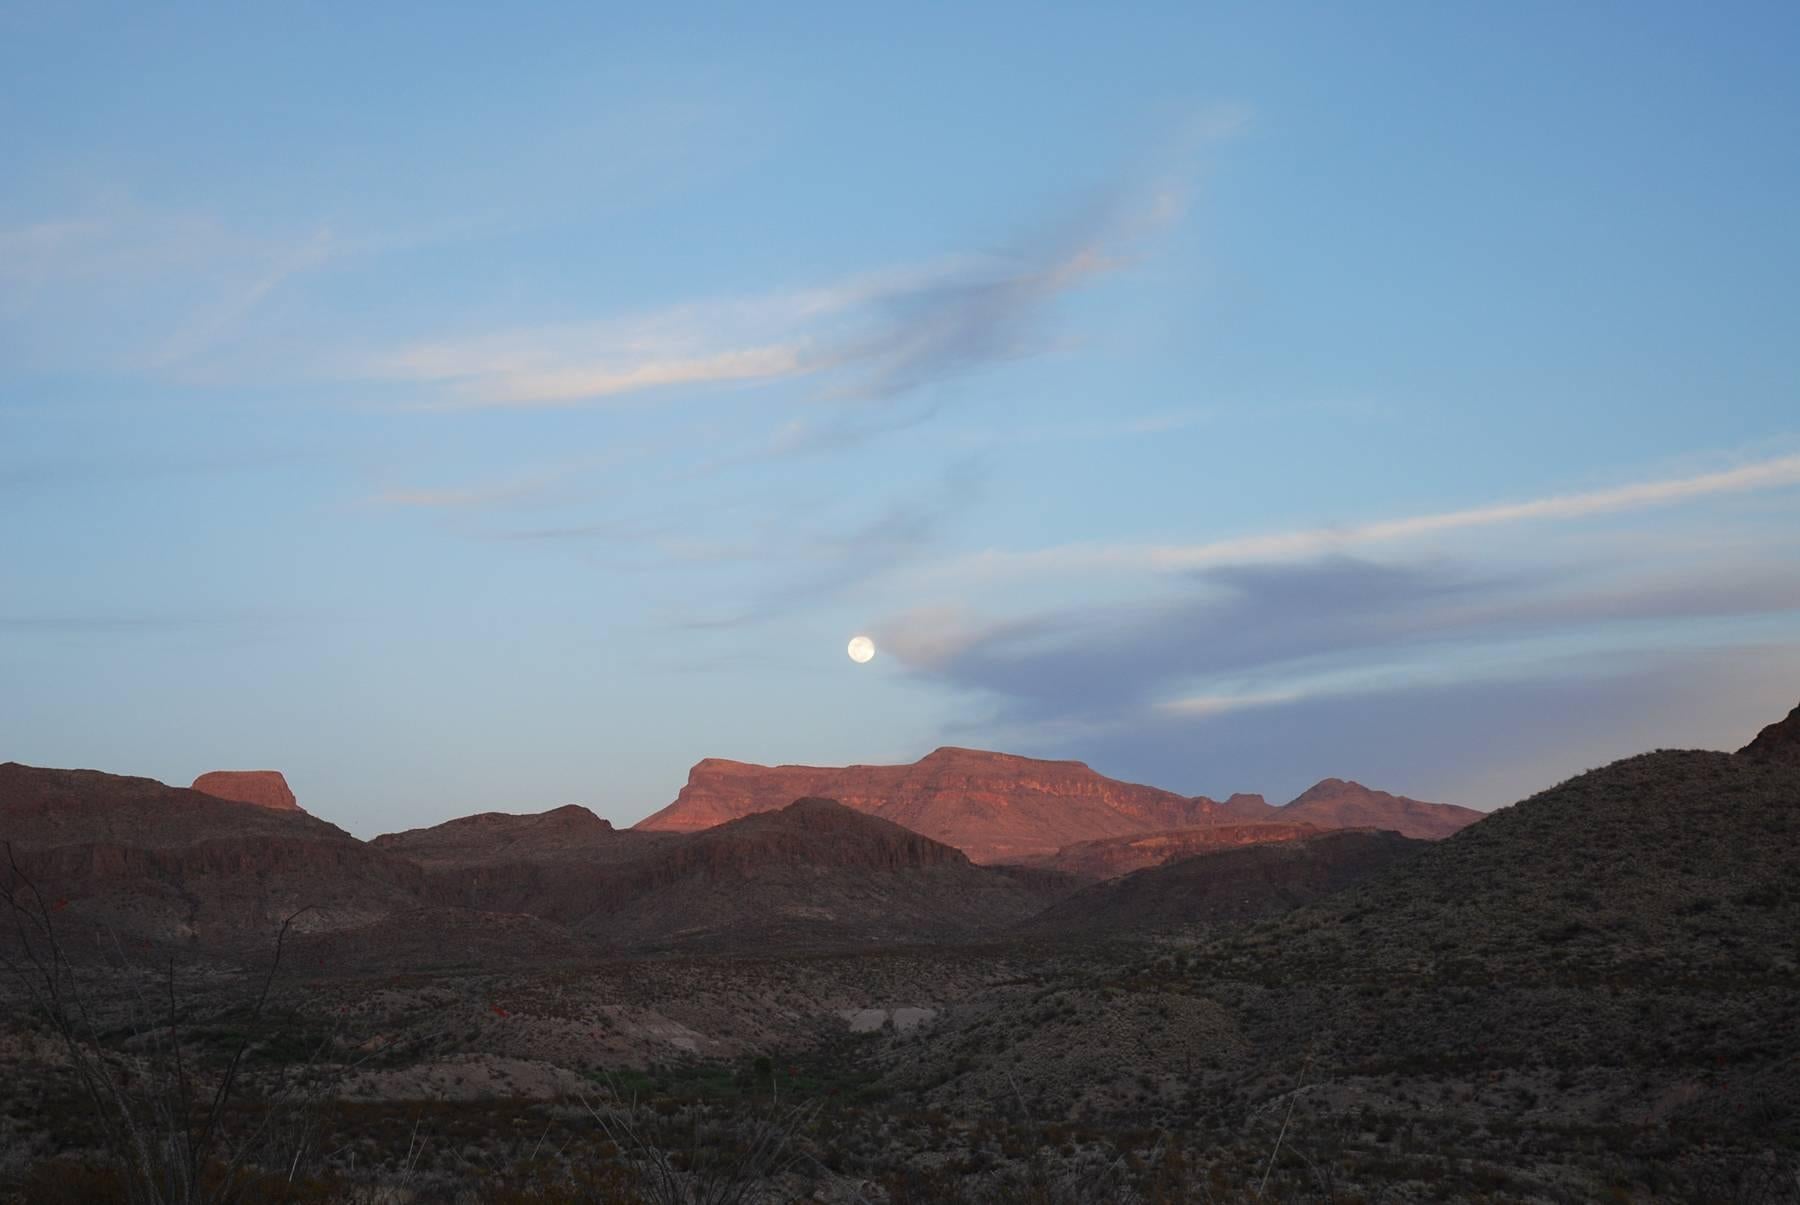 Peter Brown Landscape Photograph - West Texas: Full Moon over the Chisos Mountain, Big Bend National Park